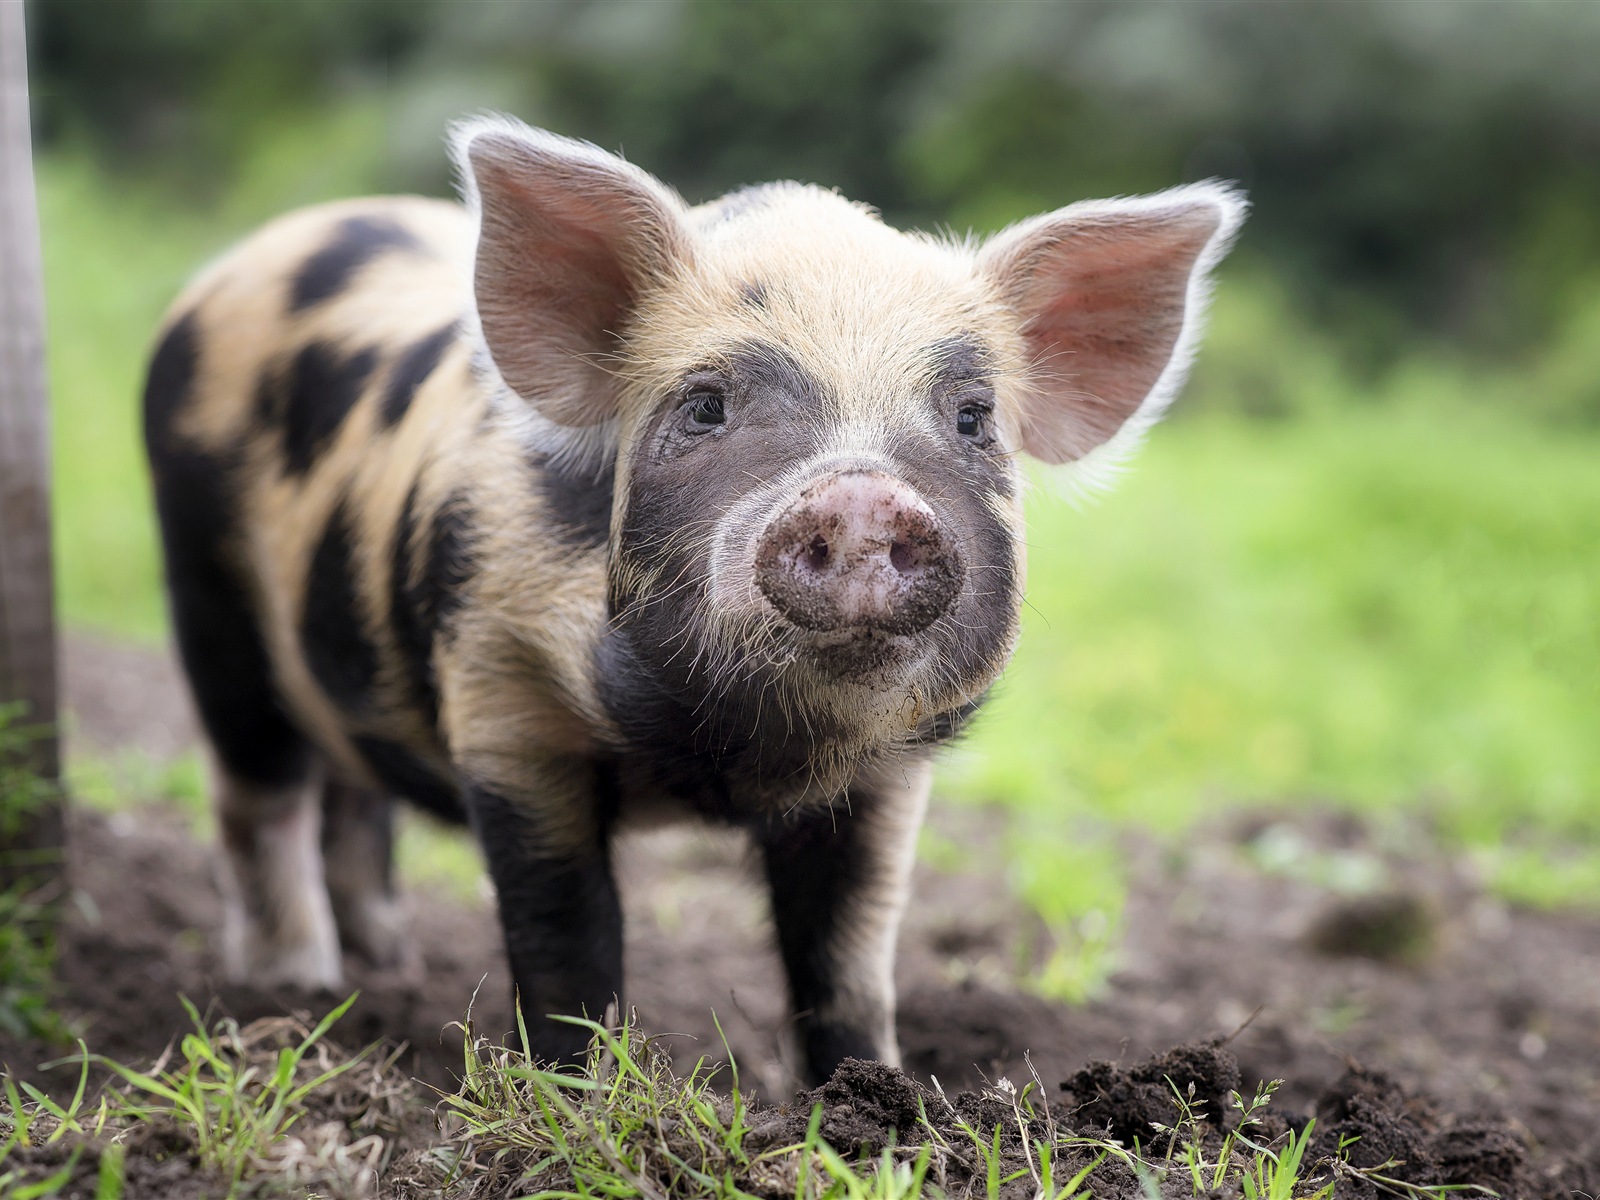 Pig Year about pigs HD wallpapers #8 - 1600x1200